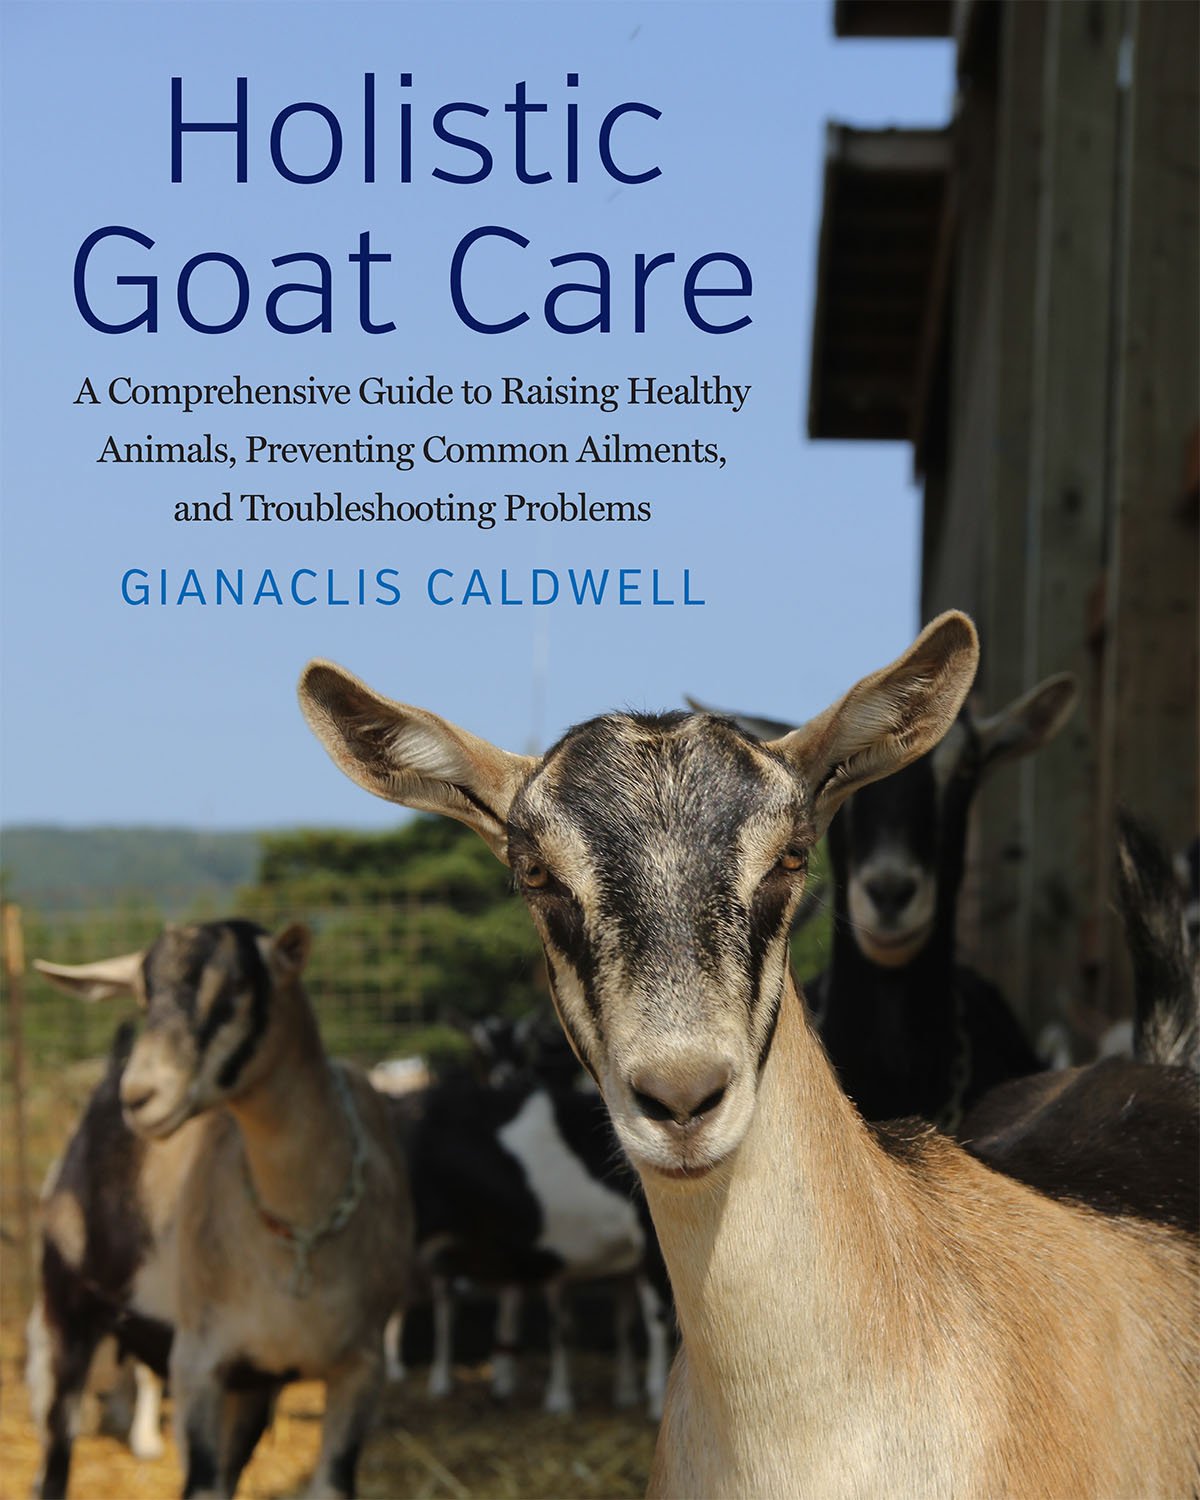 The Holistic Goat Care cover